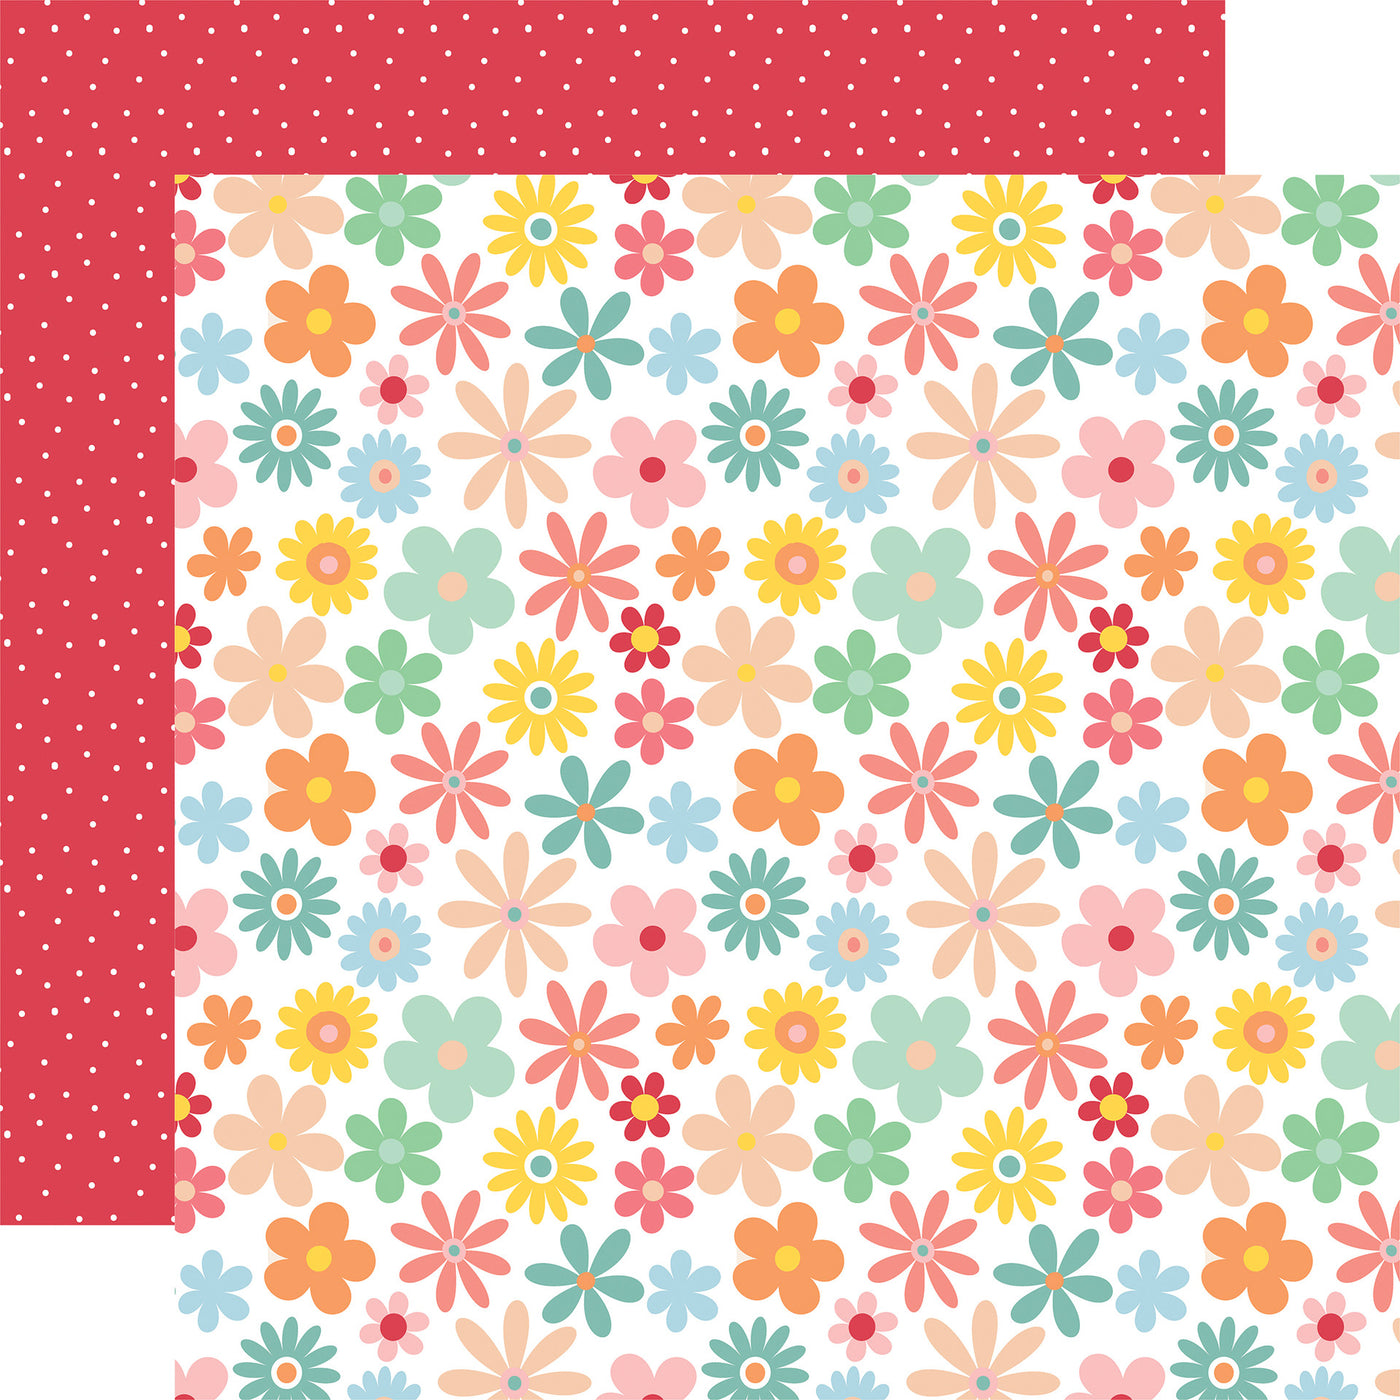 From Echo Park Paper, 12x12 double-sided patterned paper - (bright retro daisy pattern with a white polka dots pattern on a red background reverse).